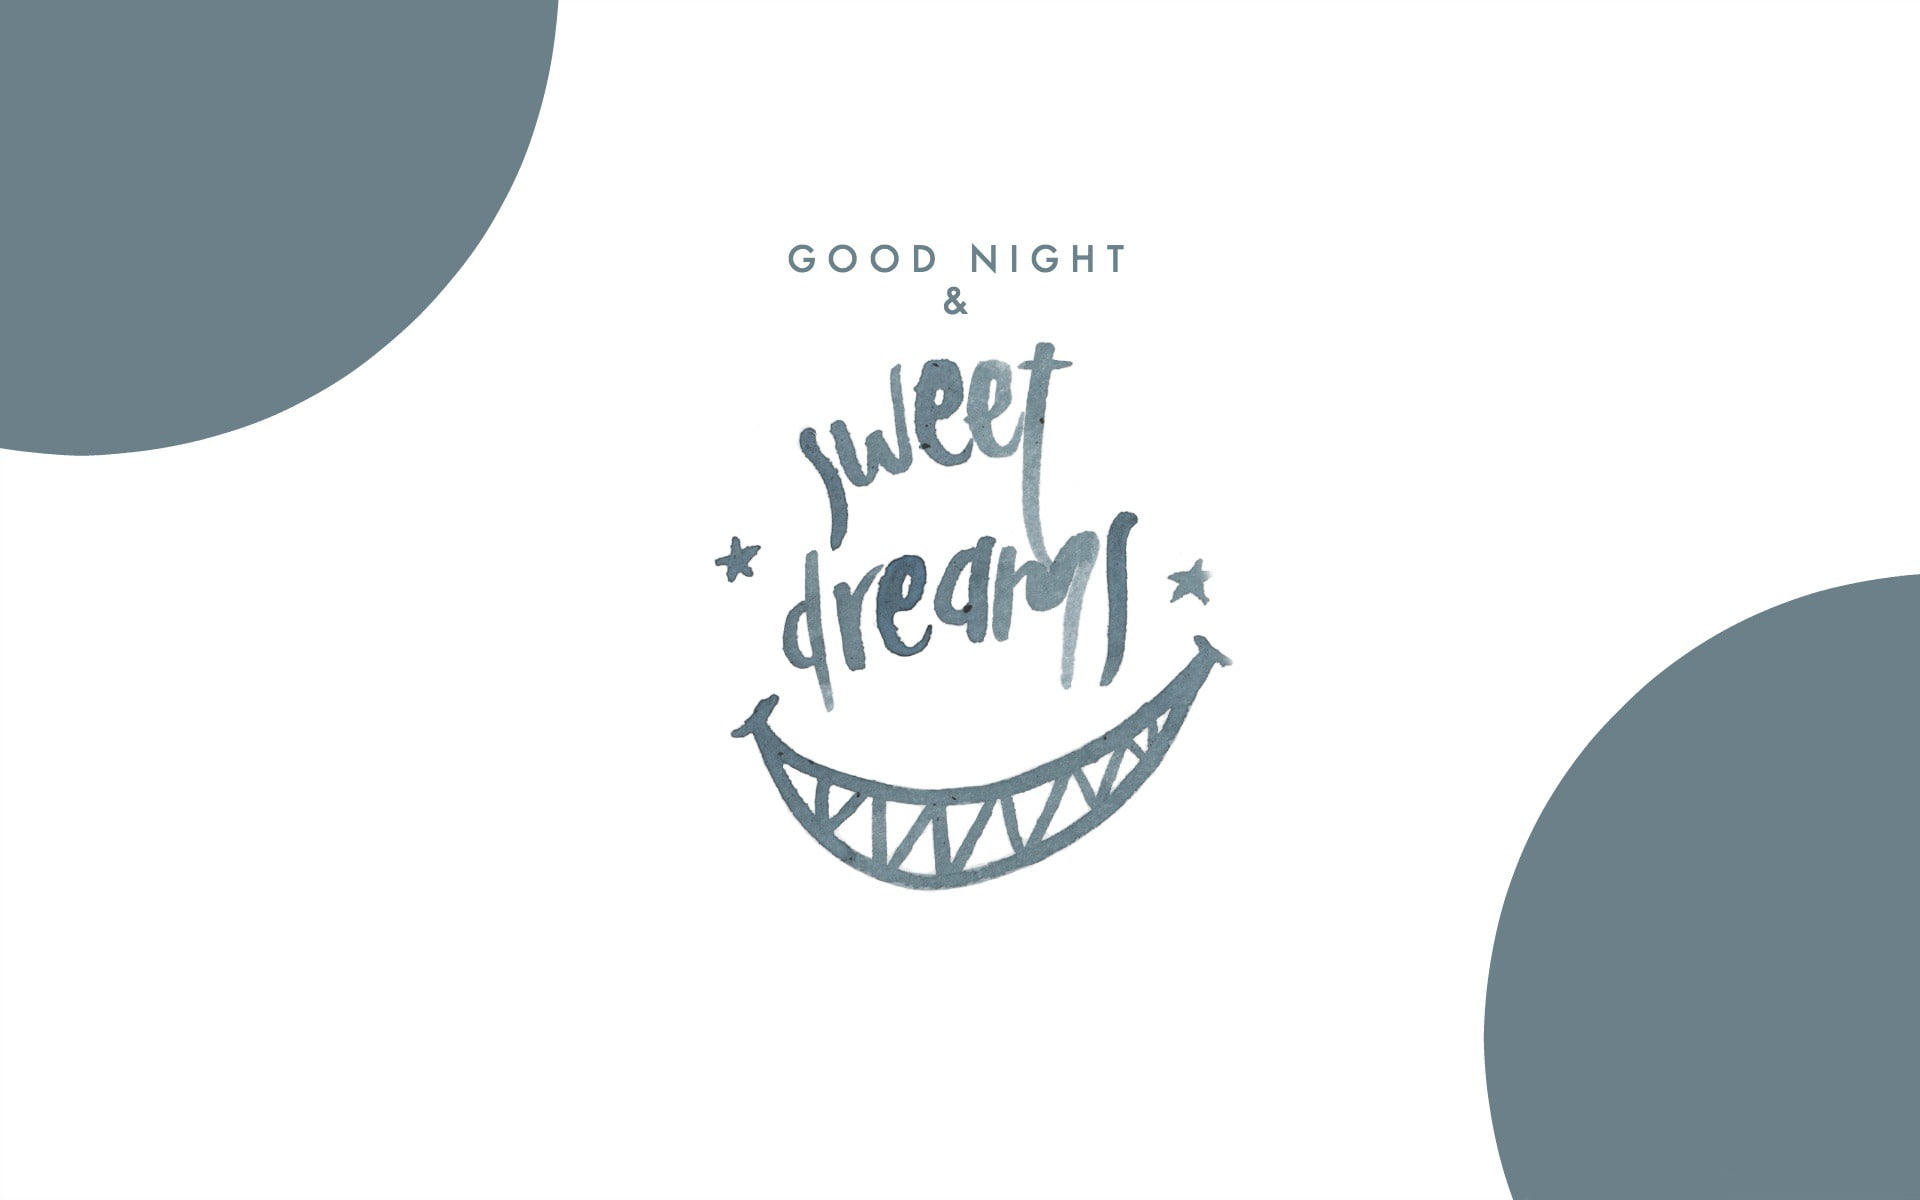 Good night and sweet dreams-Text Artistic Design H.., communication